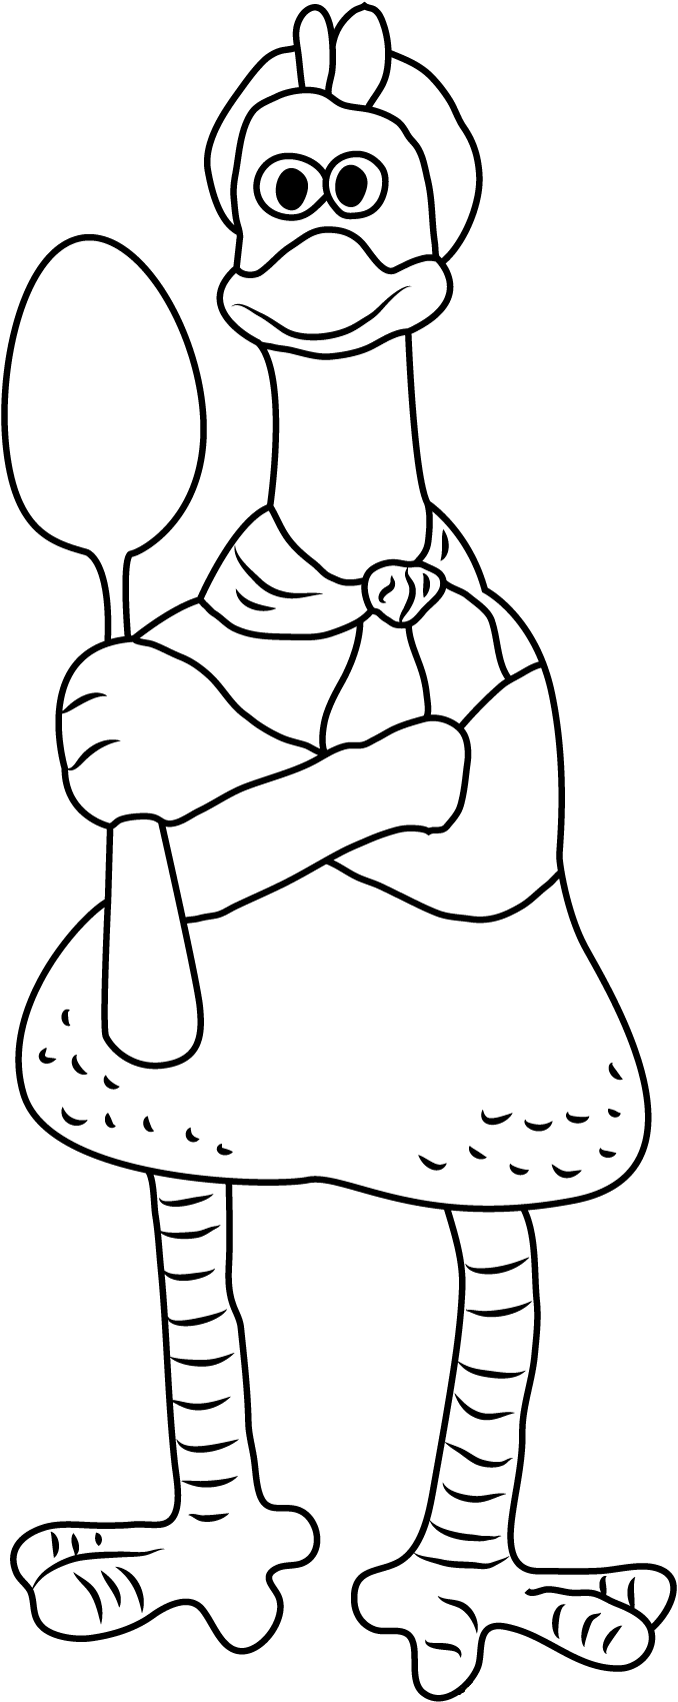 spoon coloring pages